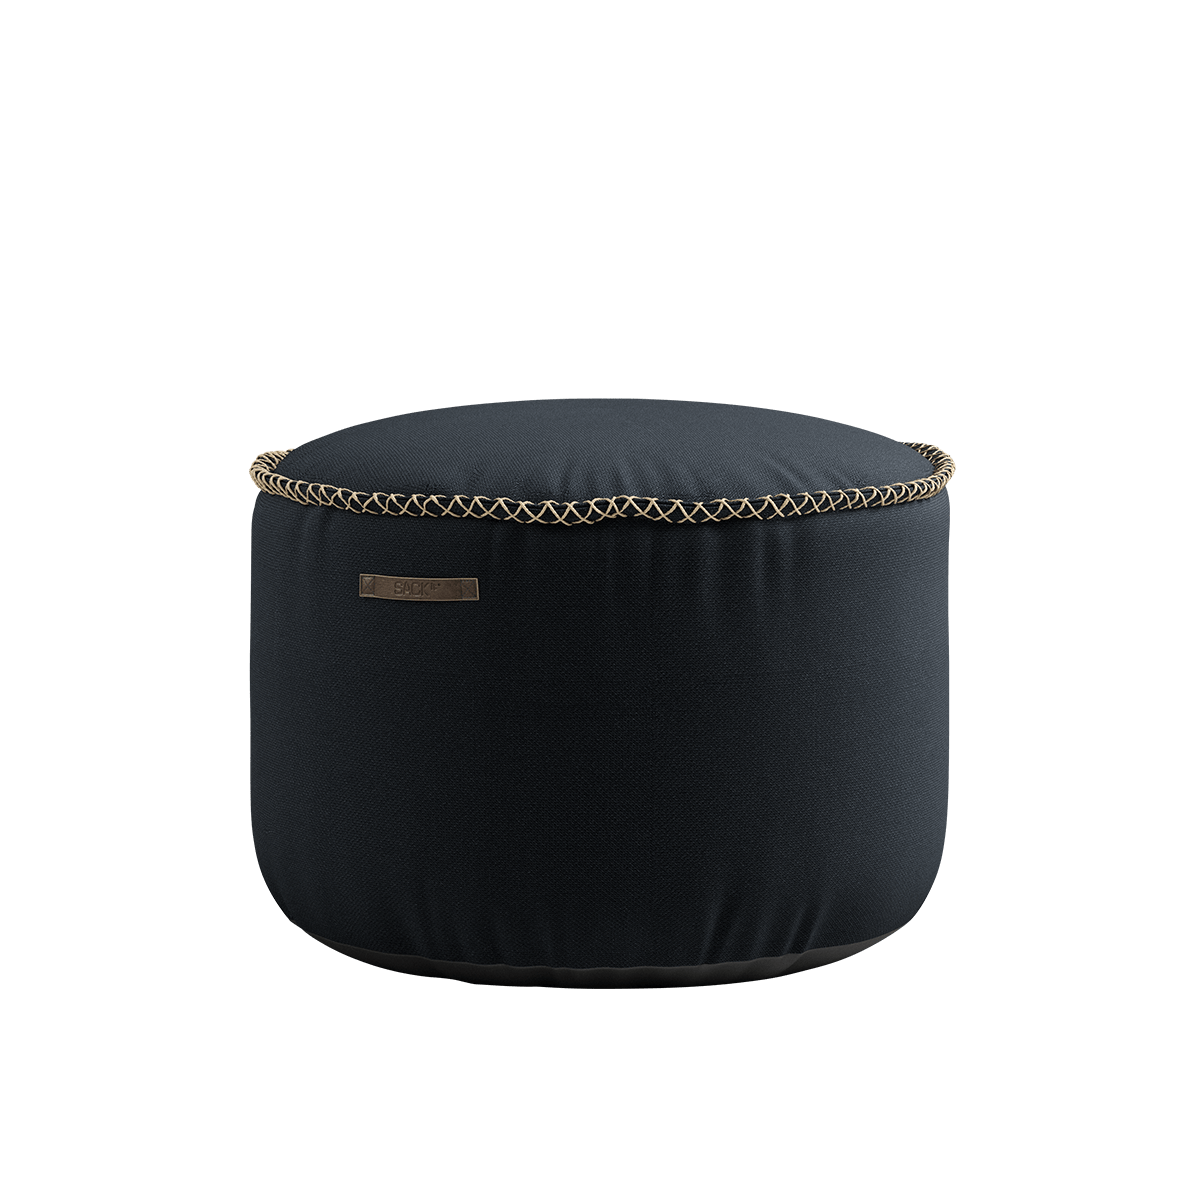 variant_8567153% | Cura Pouf [Contract] - Cura Black | SACKit